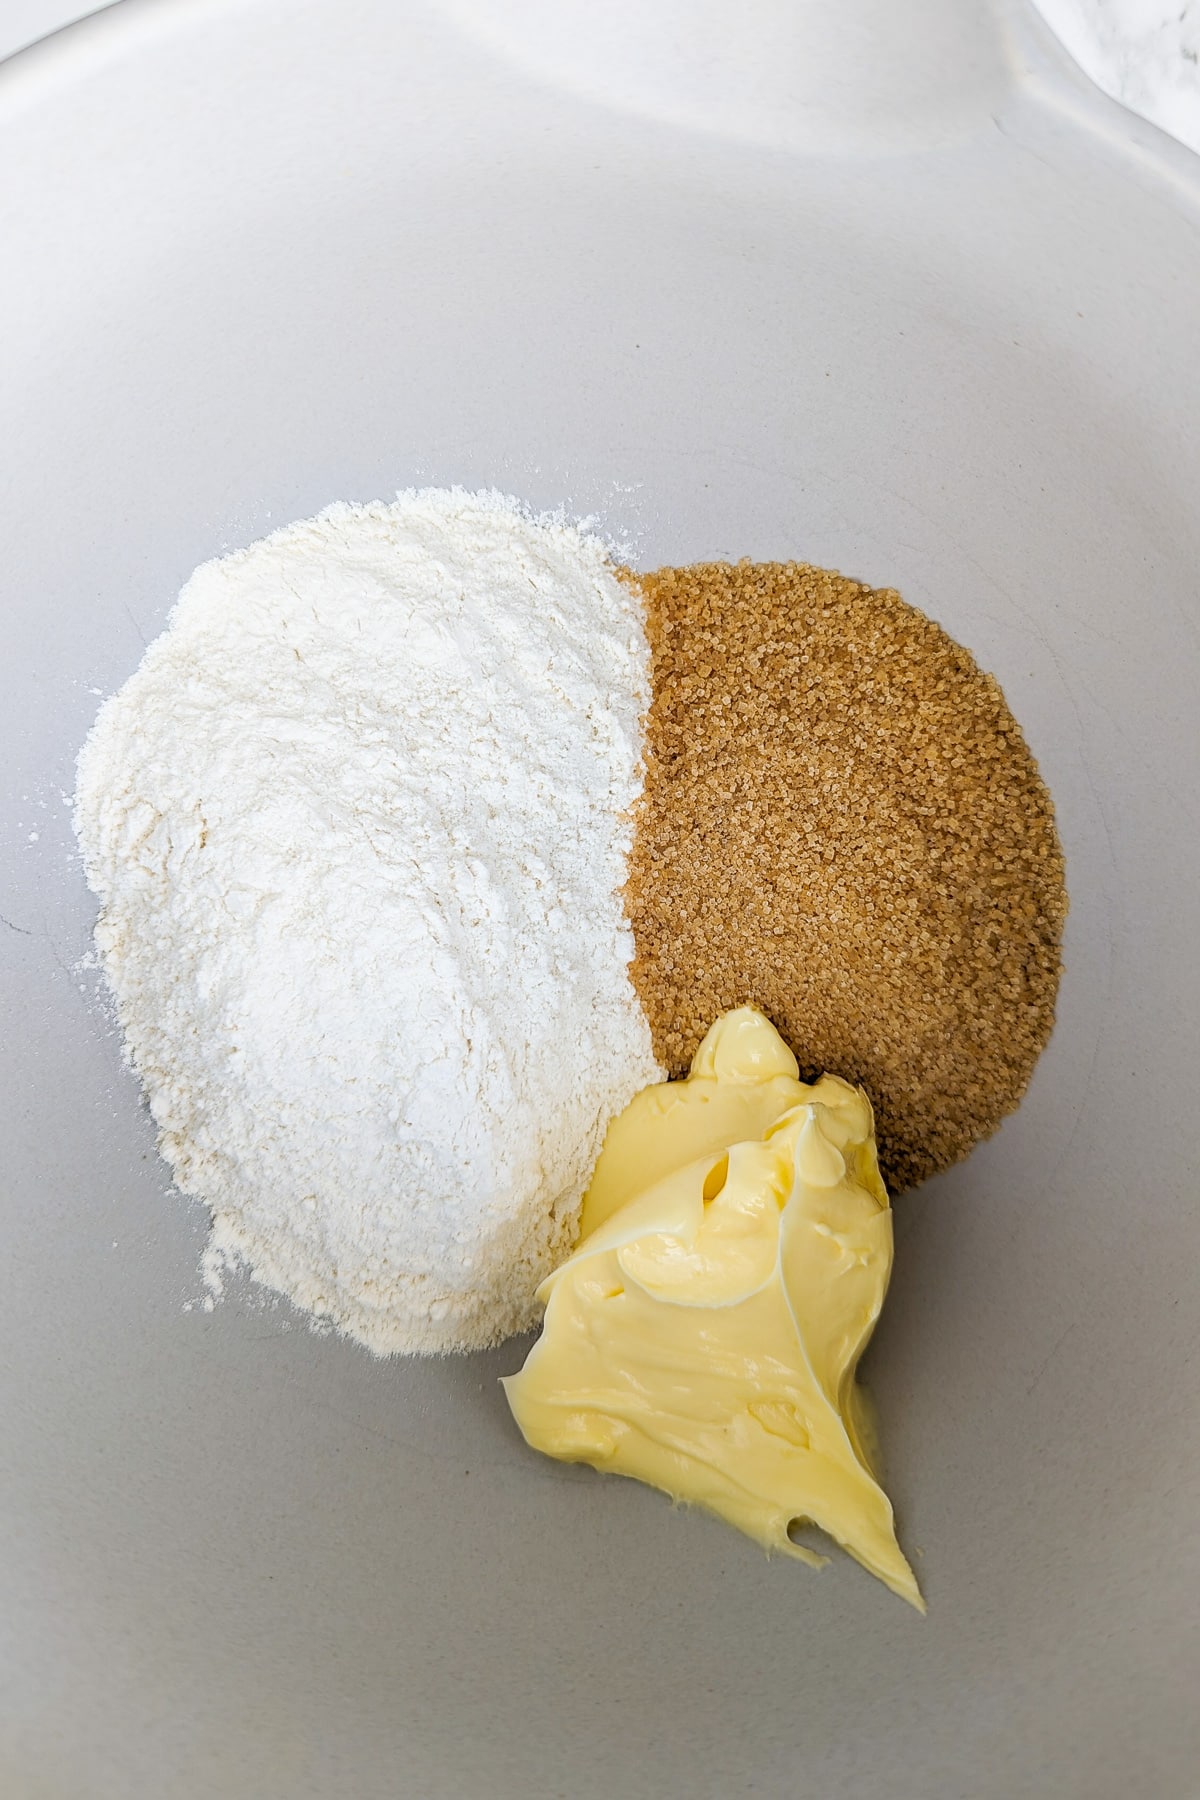 Deep bowl with flour, sugar and butter.